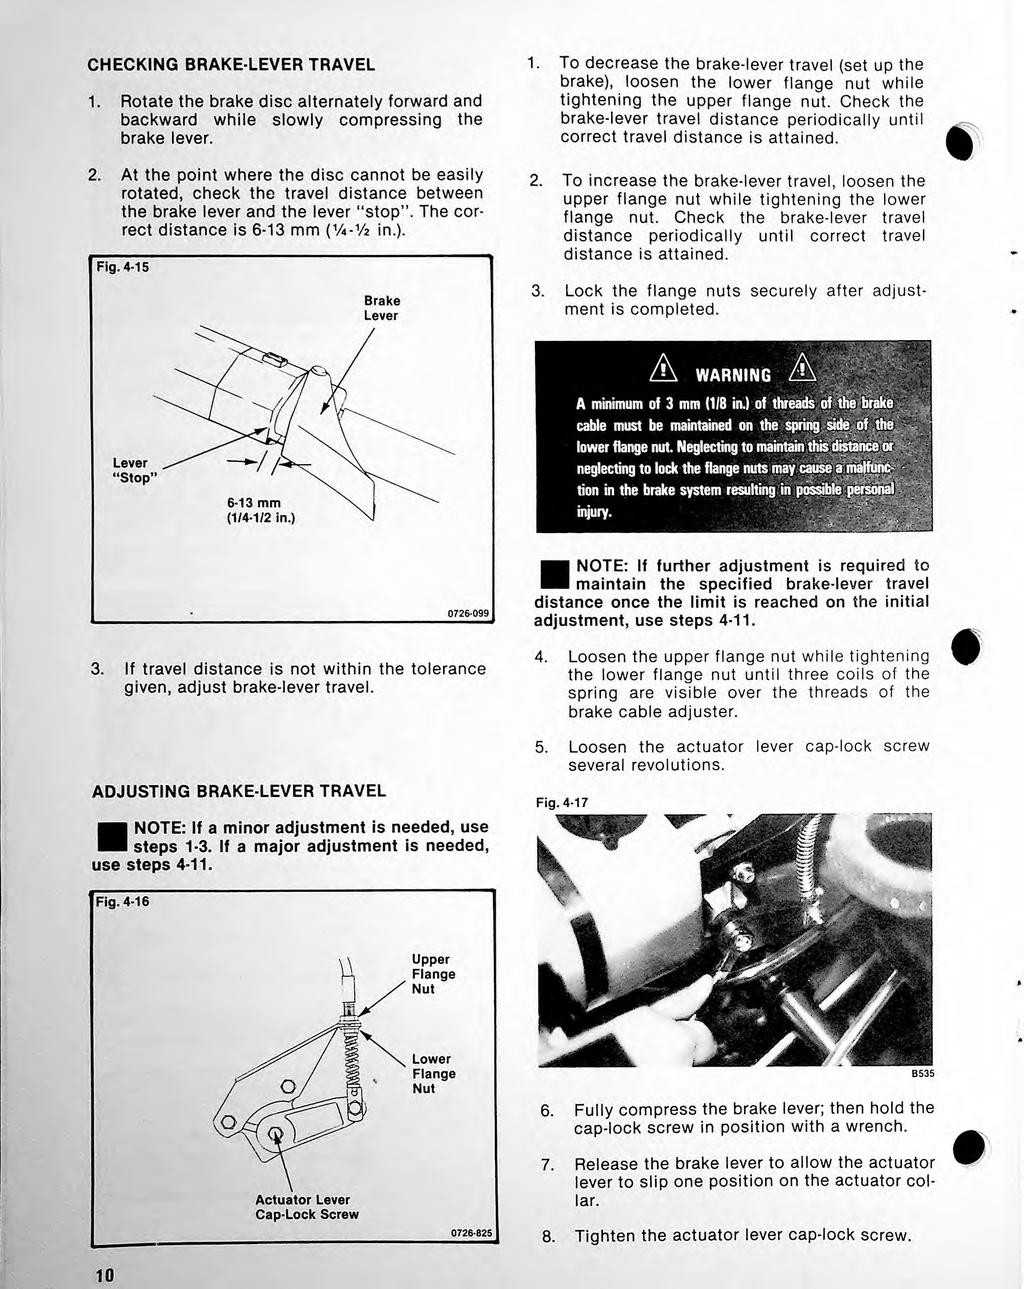 CHECKNG BRAKE-LEVER TRAVEL 1. Rotate the brake disc aternatey forward and backward whie sowy compressing the brake ever. 2.